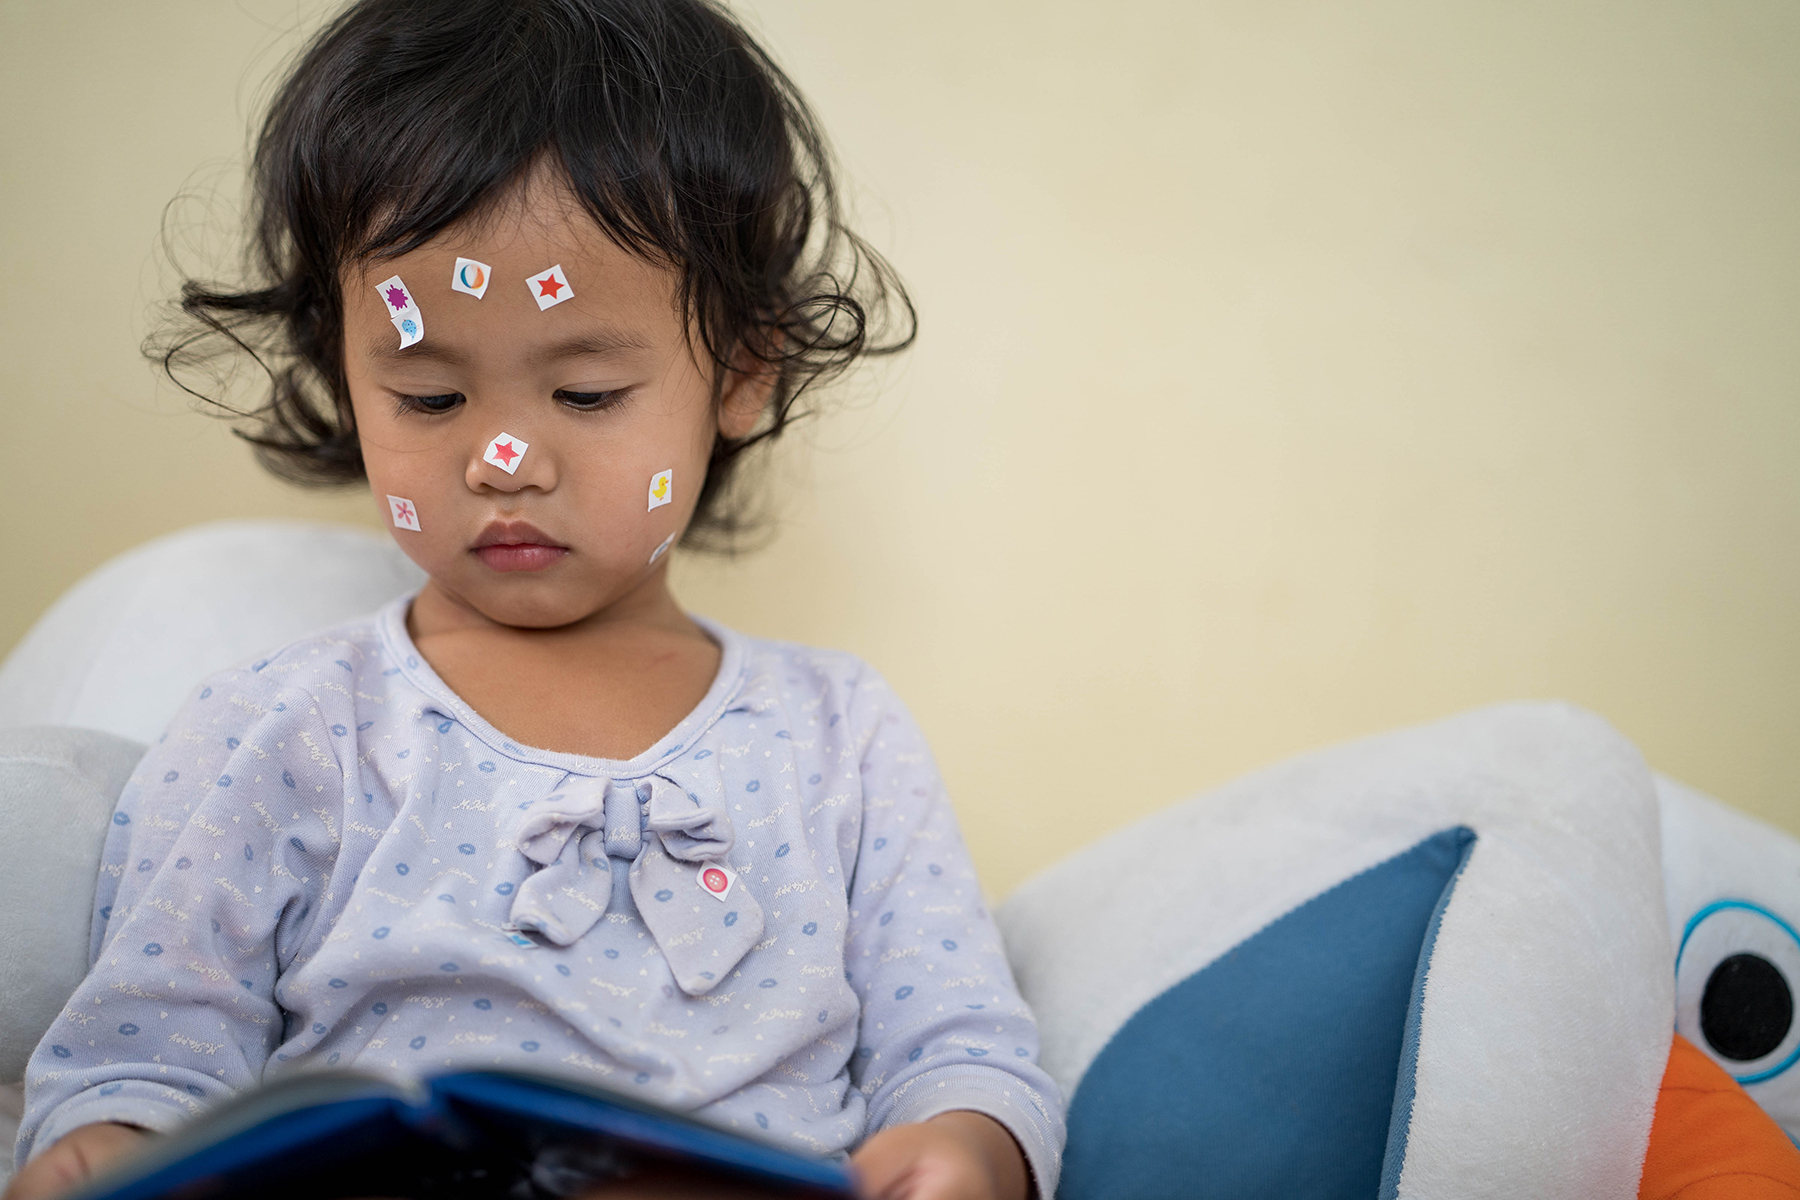 Photo of a little girl sitting on her bed, looking at a book with some stickers on her face